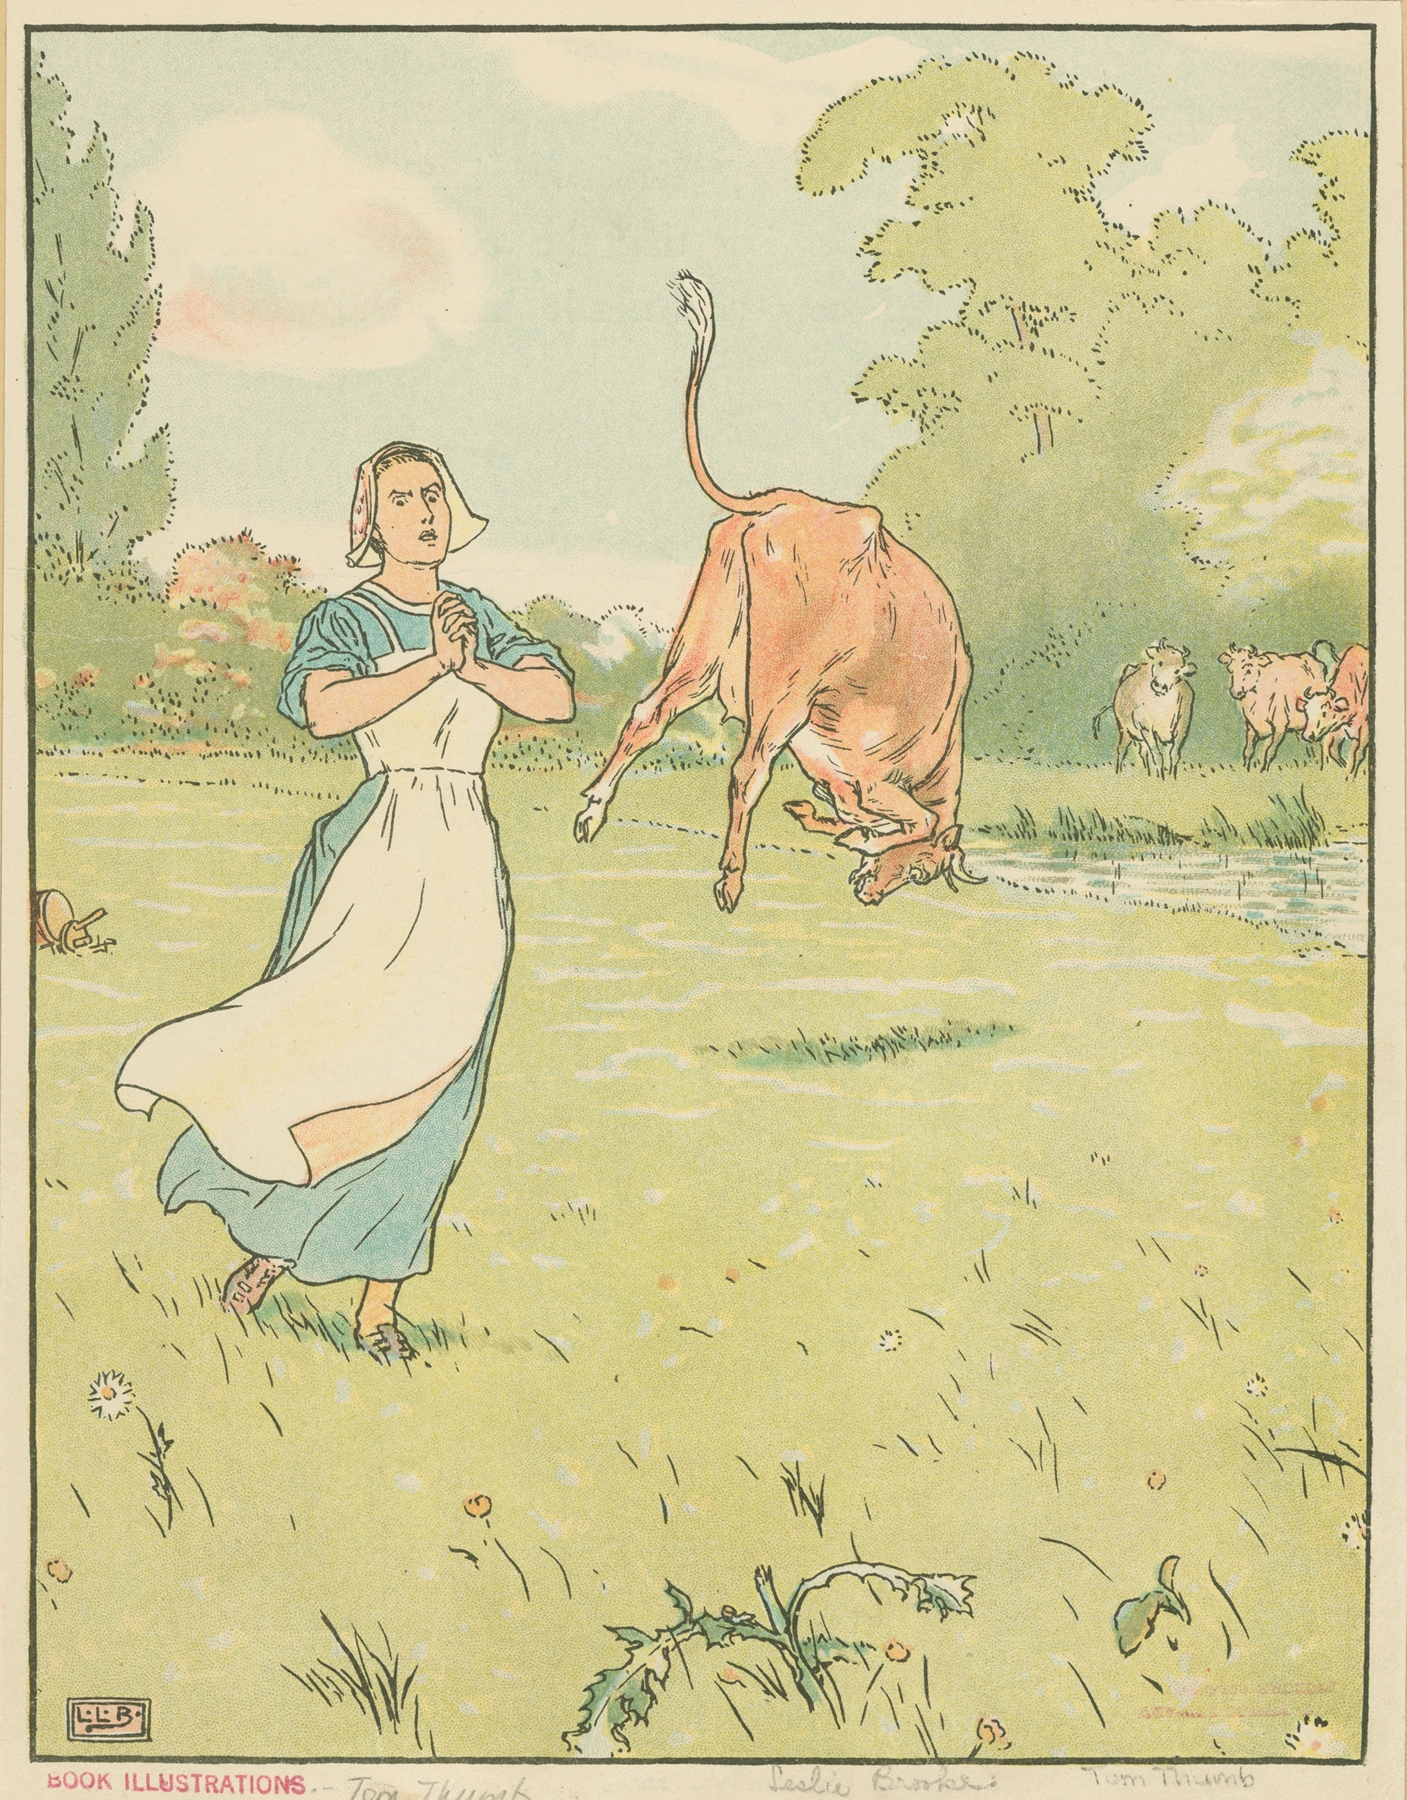 Milkmaid and cows in a field 썸네일